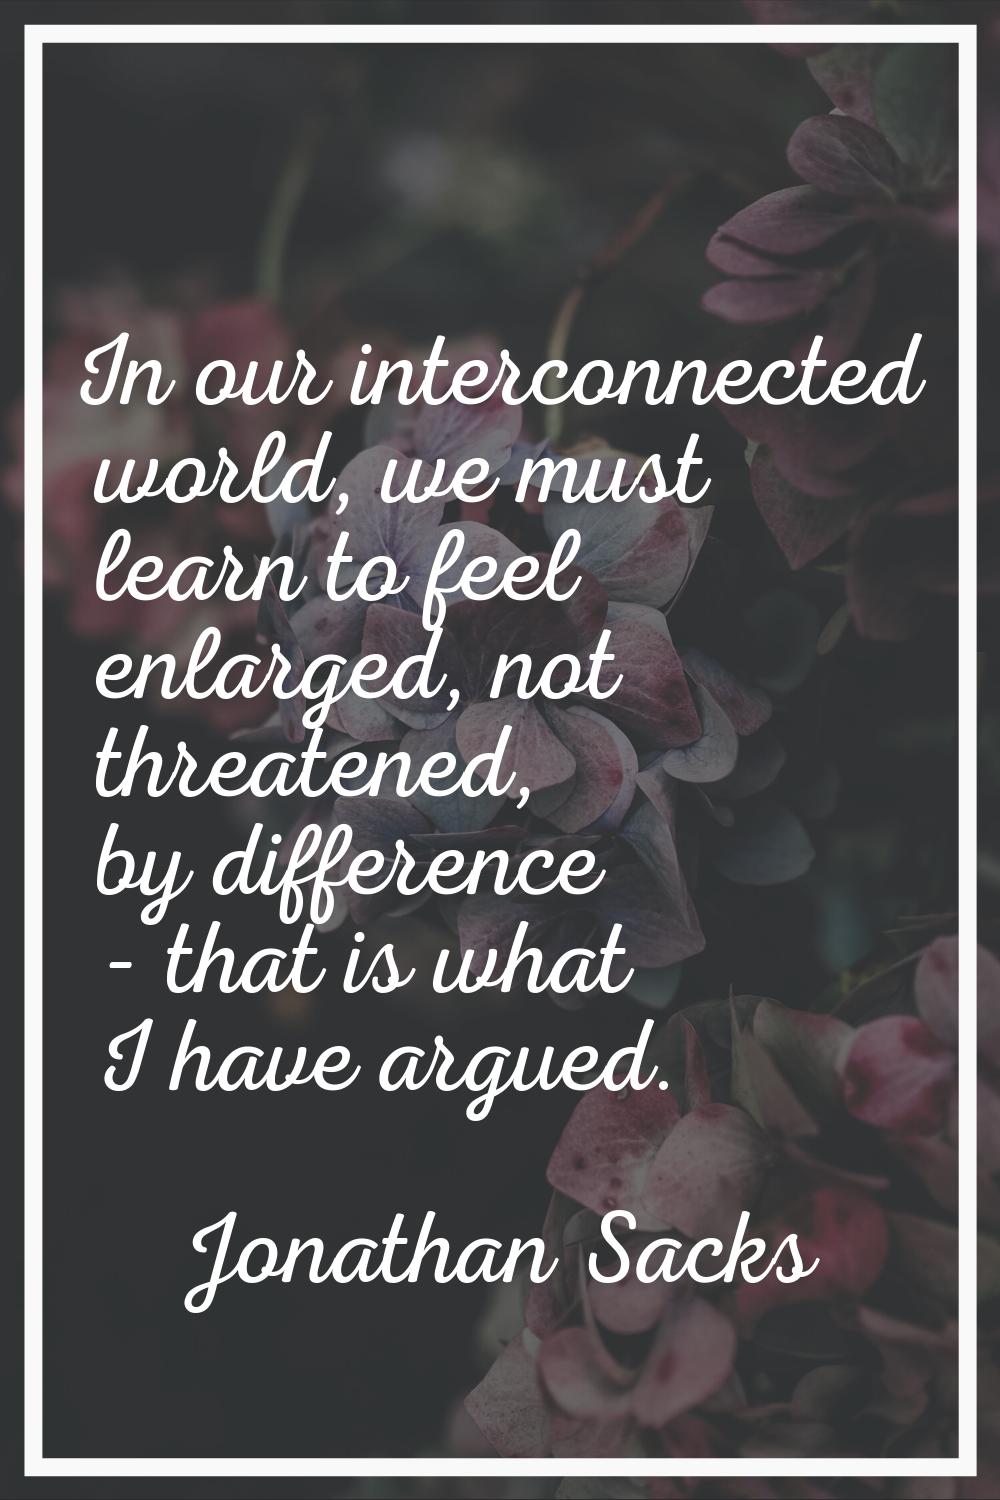 In our interconnected world, we must learn to feel enlarged, not threatened, by difference - that i